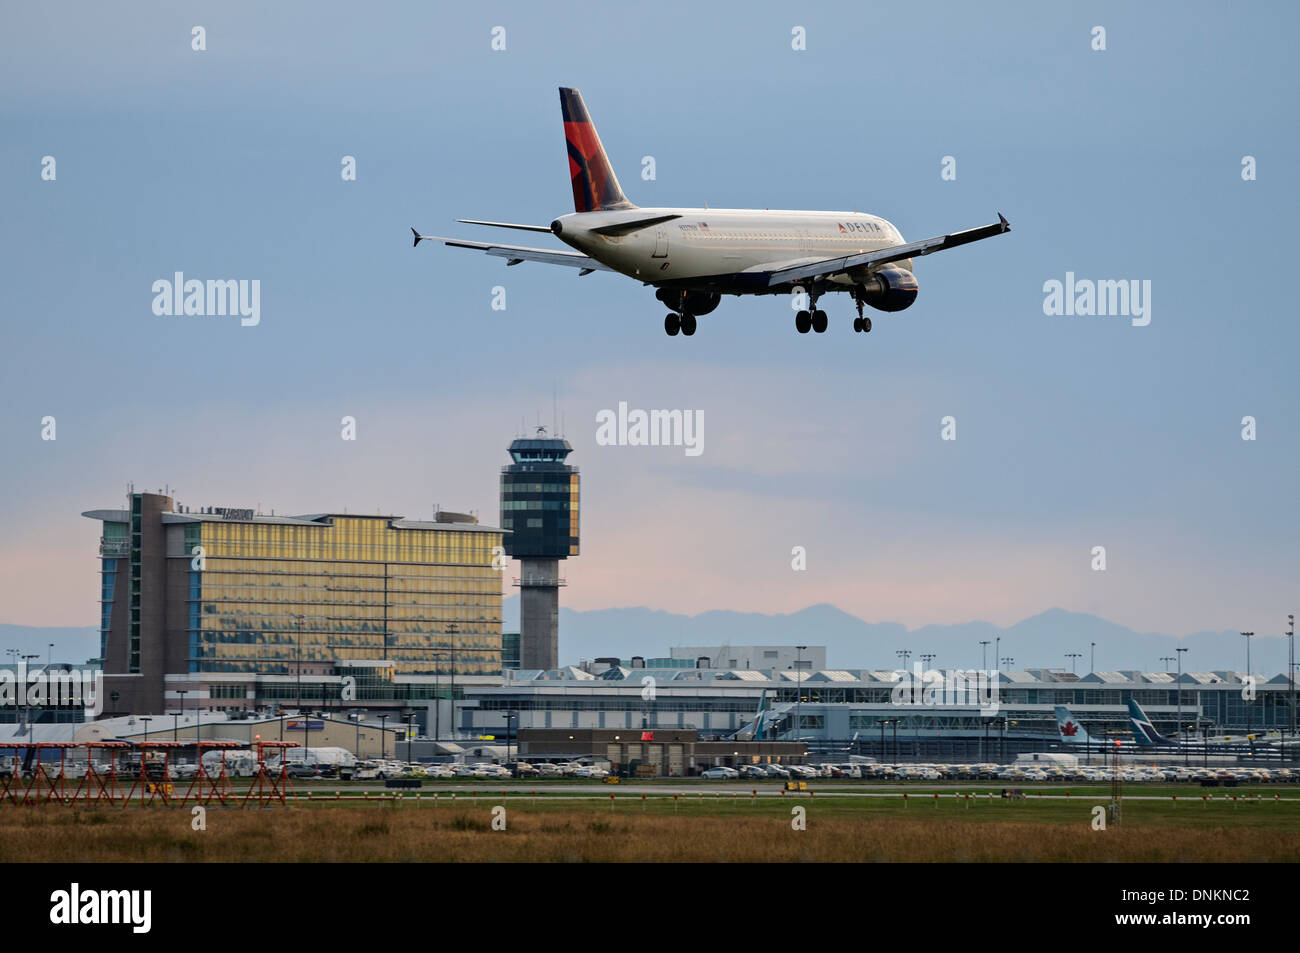 A Delta Air Lines Airbus A320 jetliner lands at Vancouver International Airport, Richmond, B.C., Canada. Stock Photo